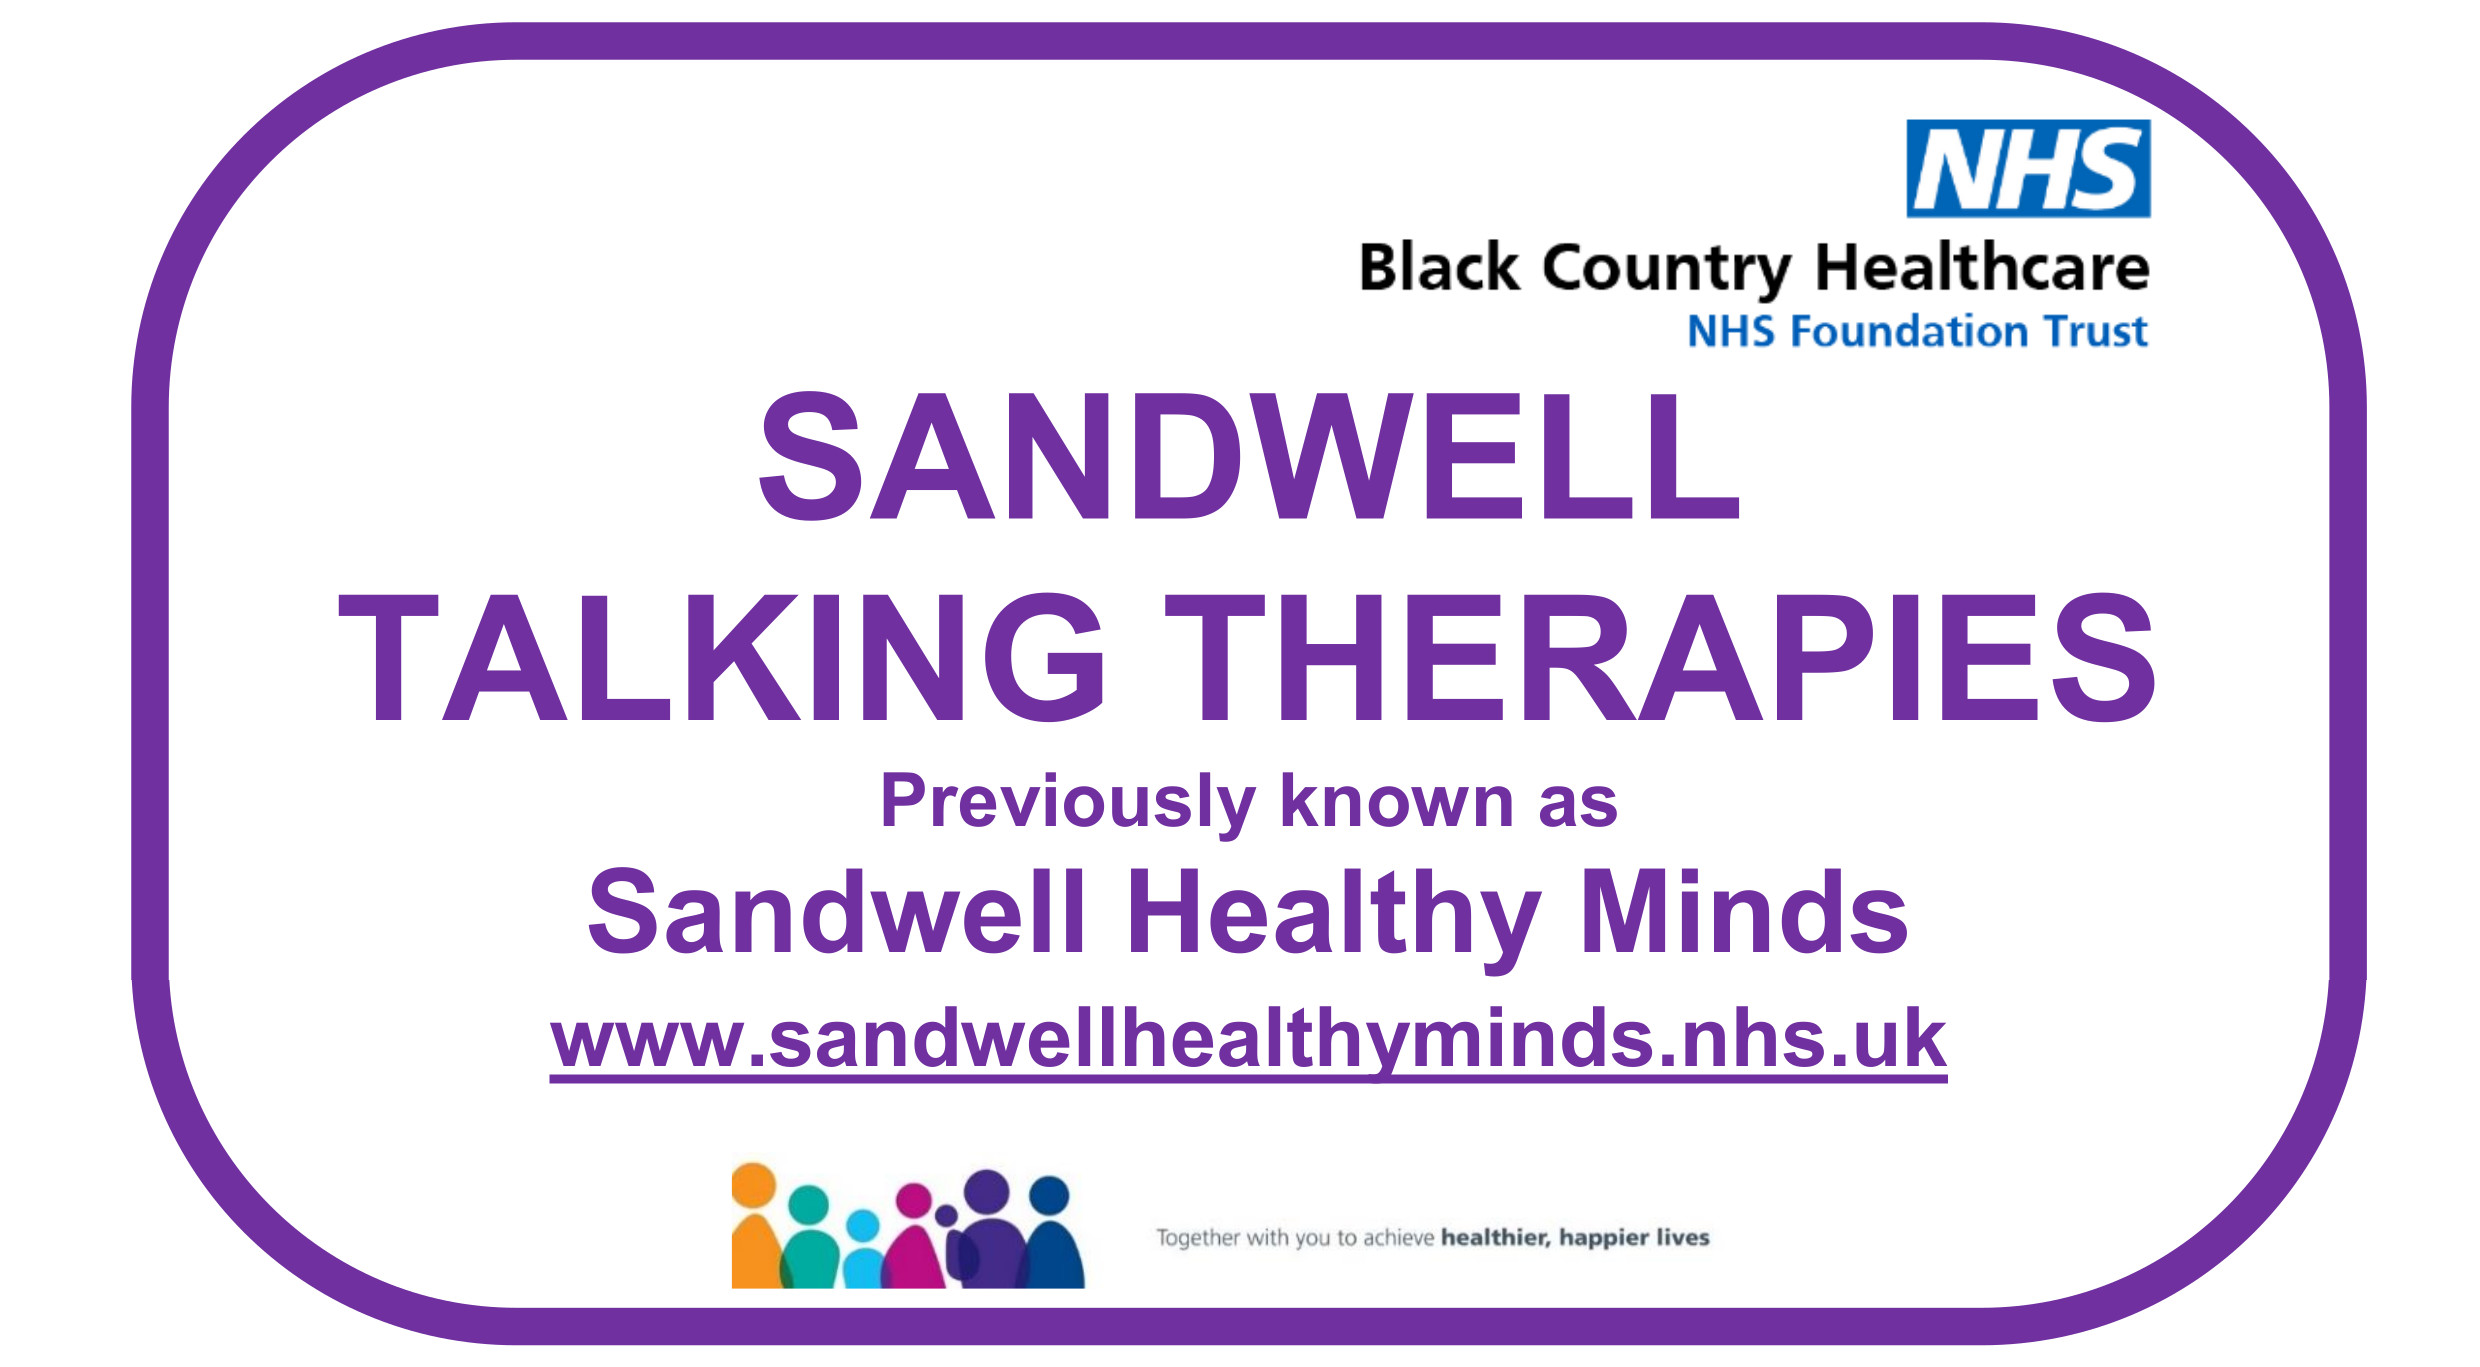 Graphic displaying "Sandwell Talking Therapies previously known as Sandwell Healthy Minds www.sandwellhealthyminds.nhs.uk